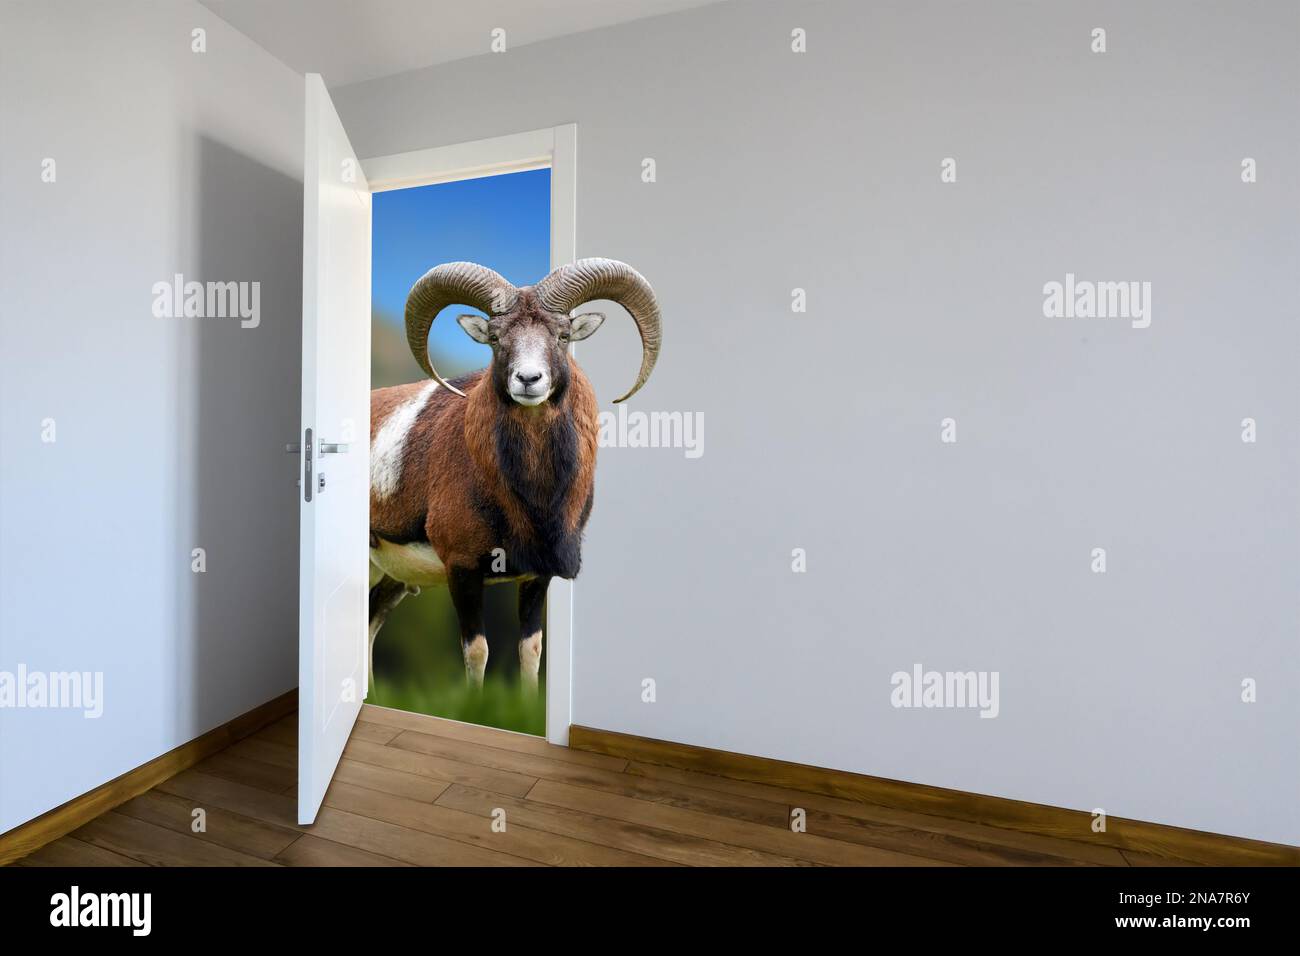 Mouflon entering a door. Animal watching from a wall. Kids decoration room. Сhild's imagination or a dream Stock Photo